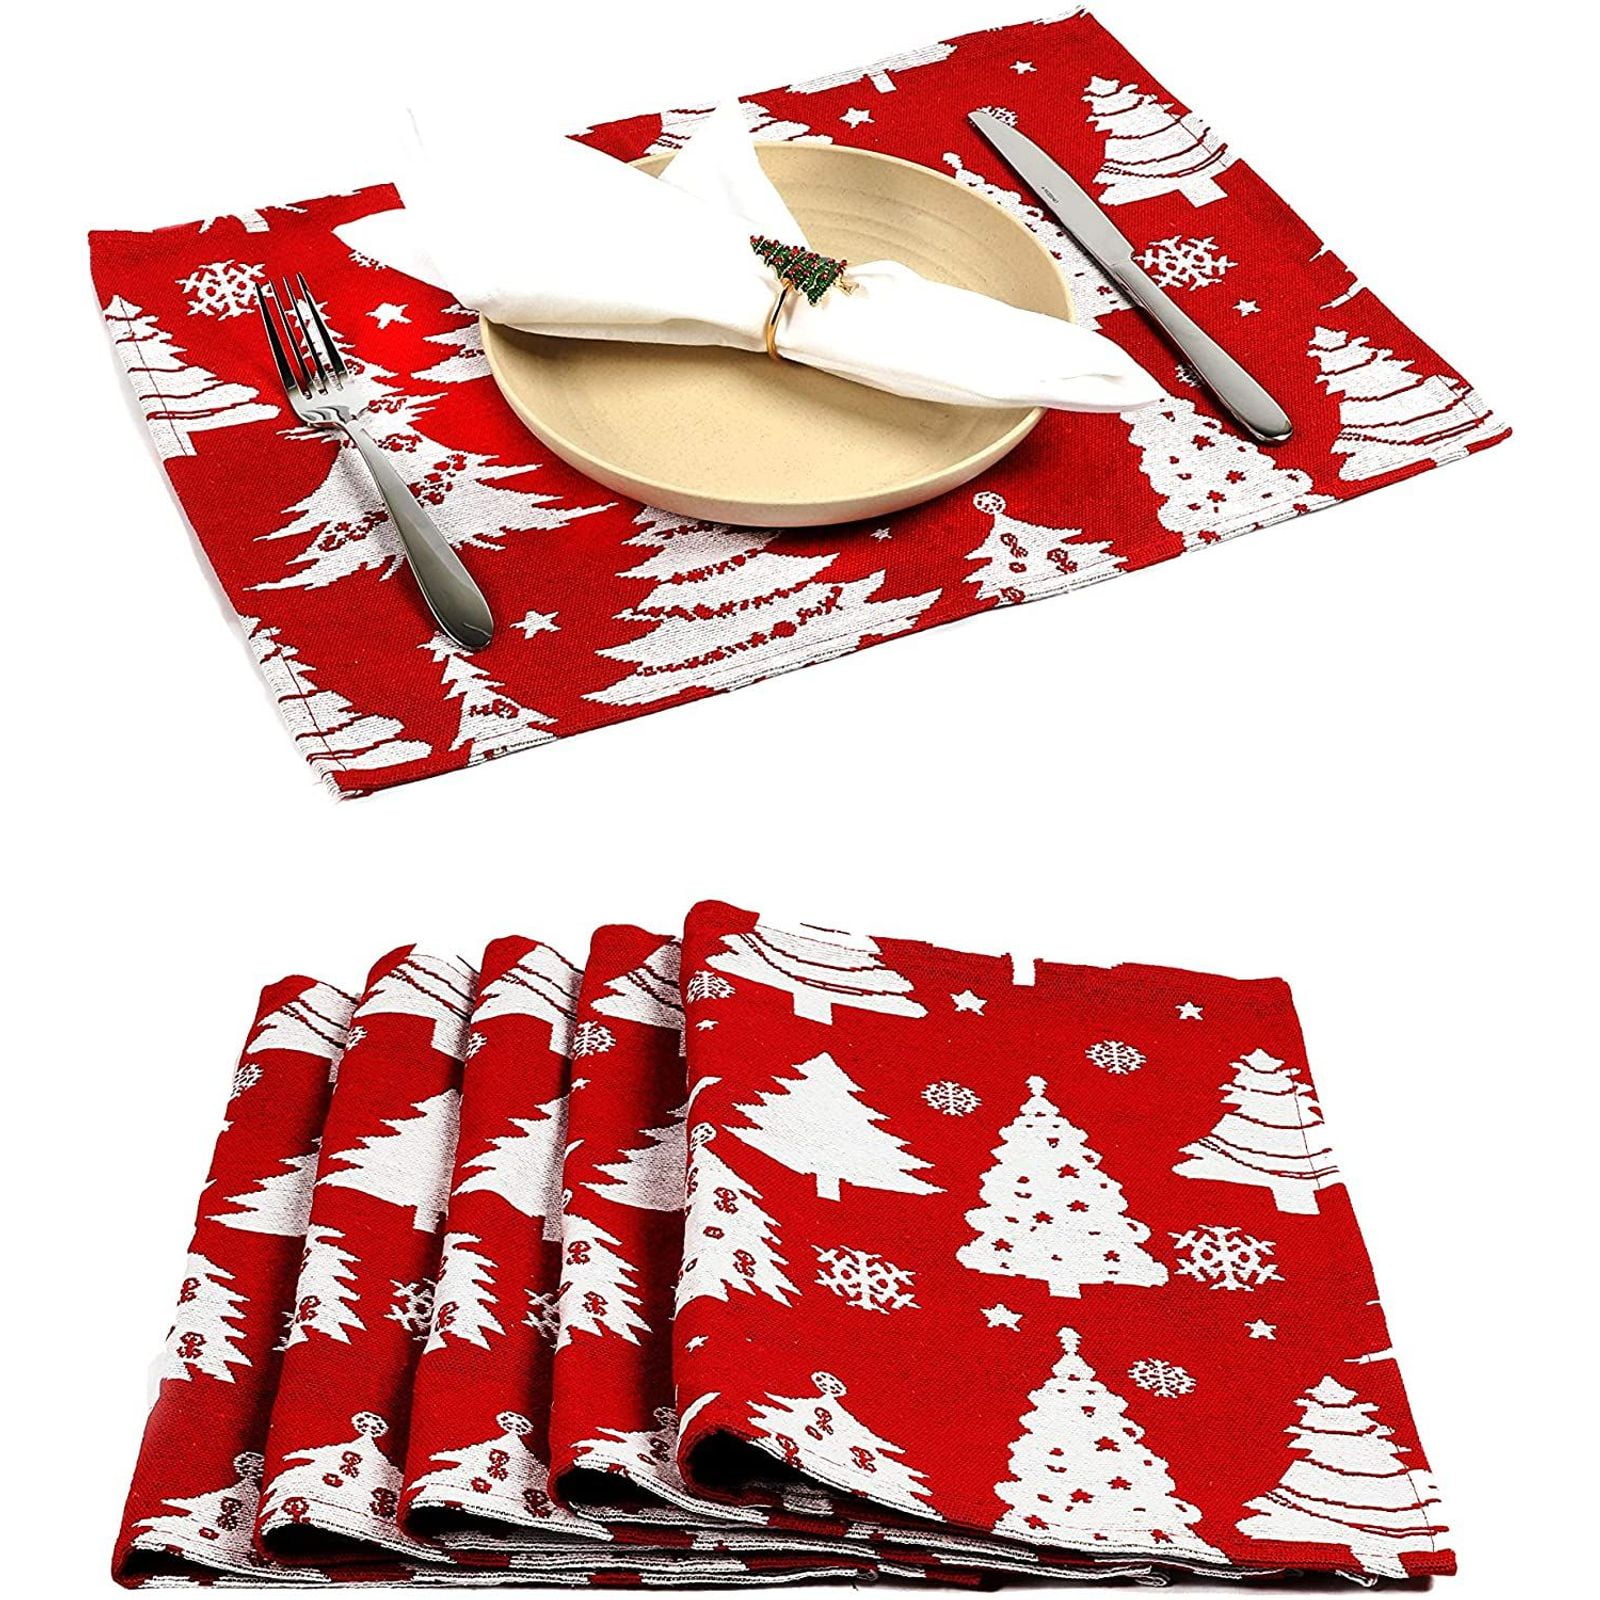 Christmas Xmas Table Mat Placemats Place Mats Sets Snowflake Dinner Set Of 4/6 